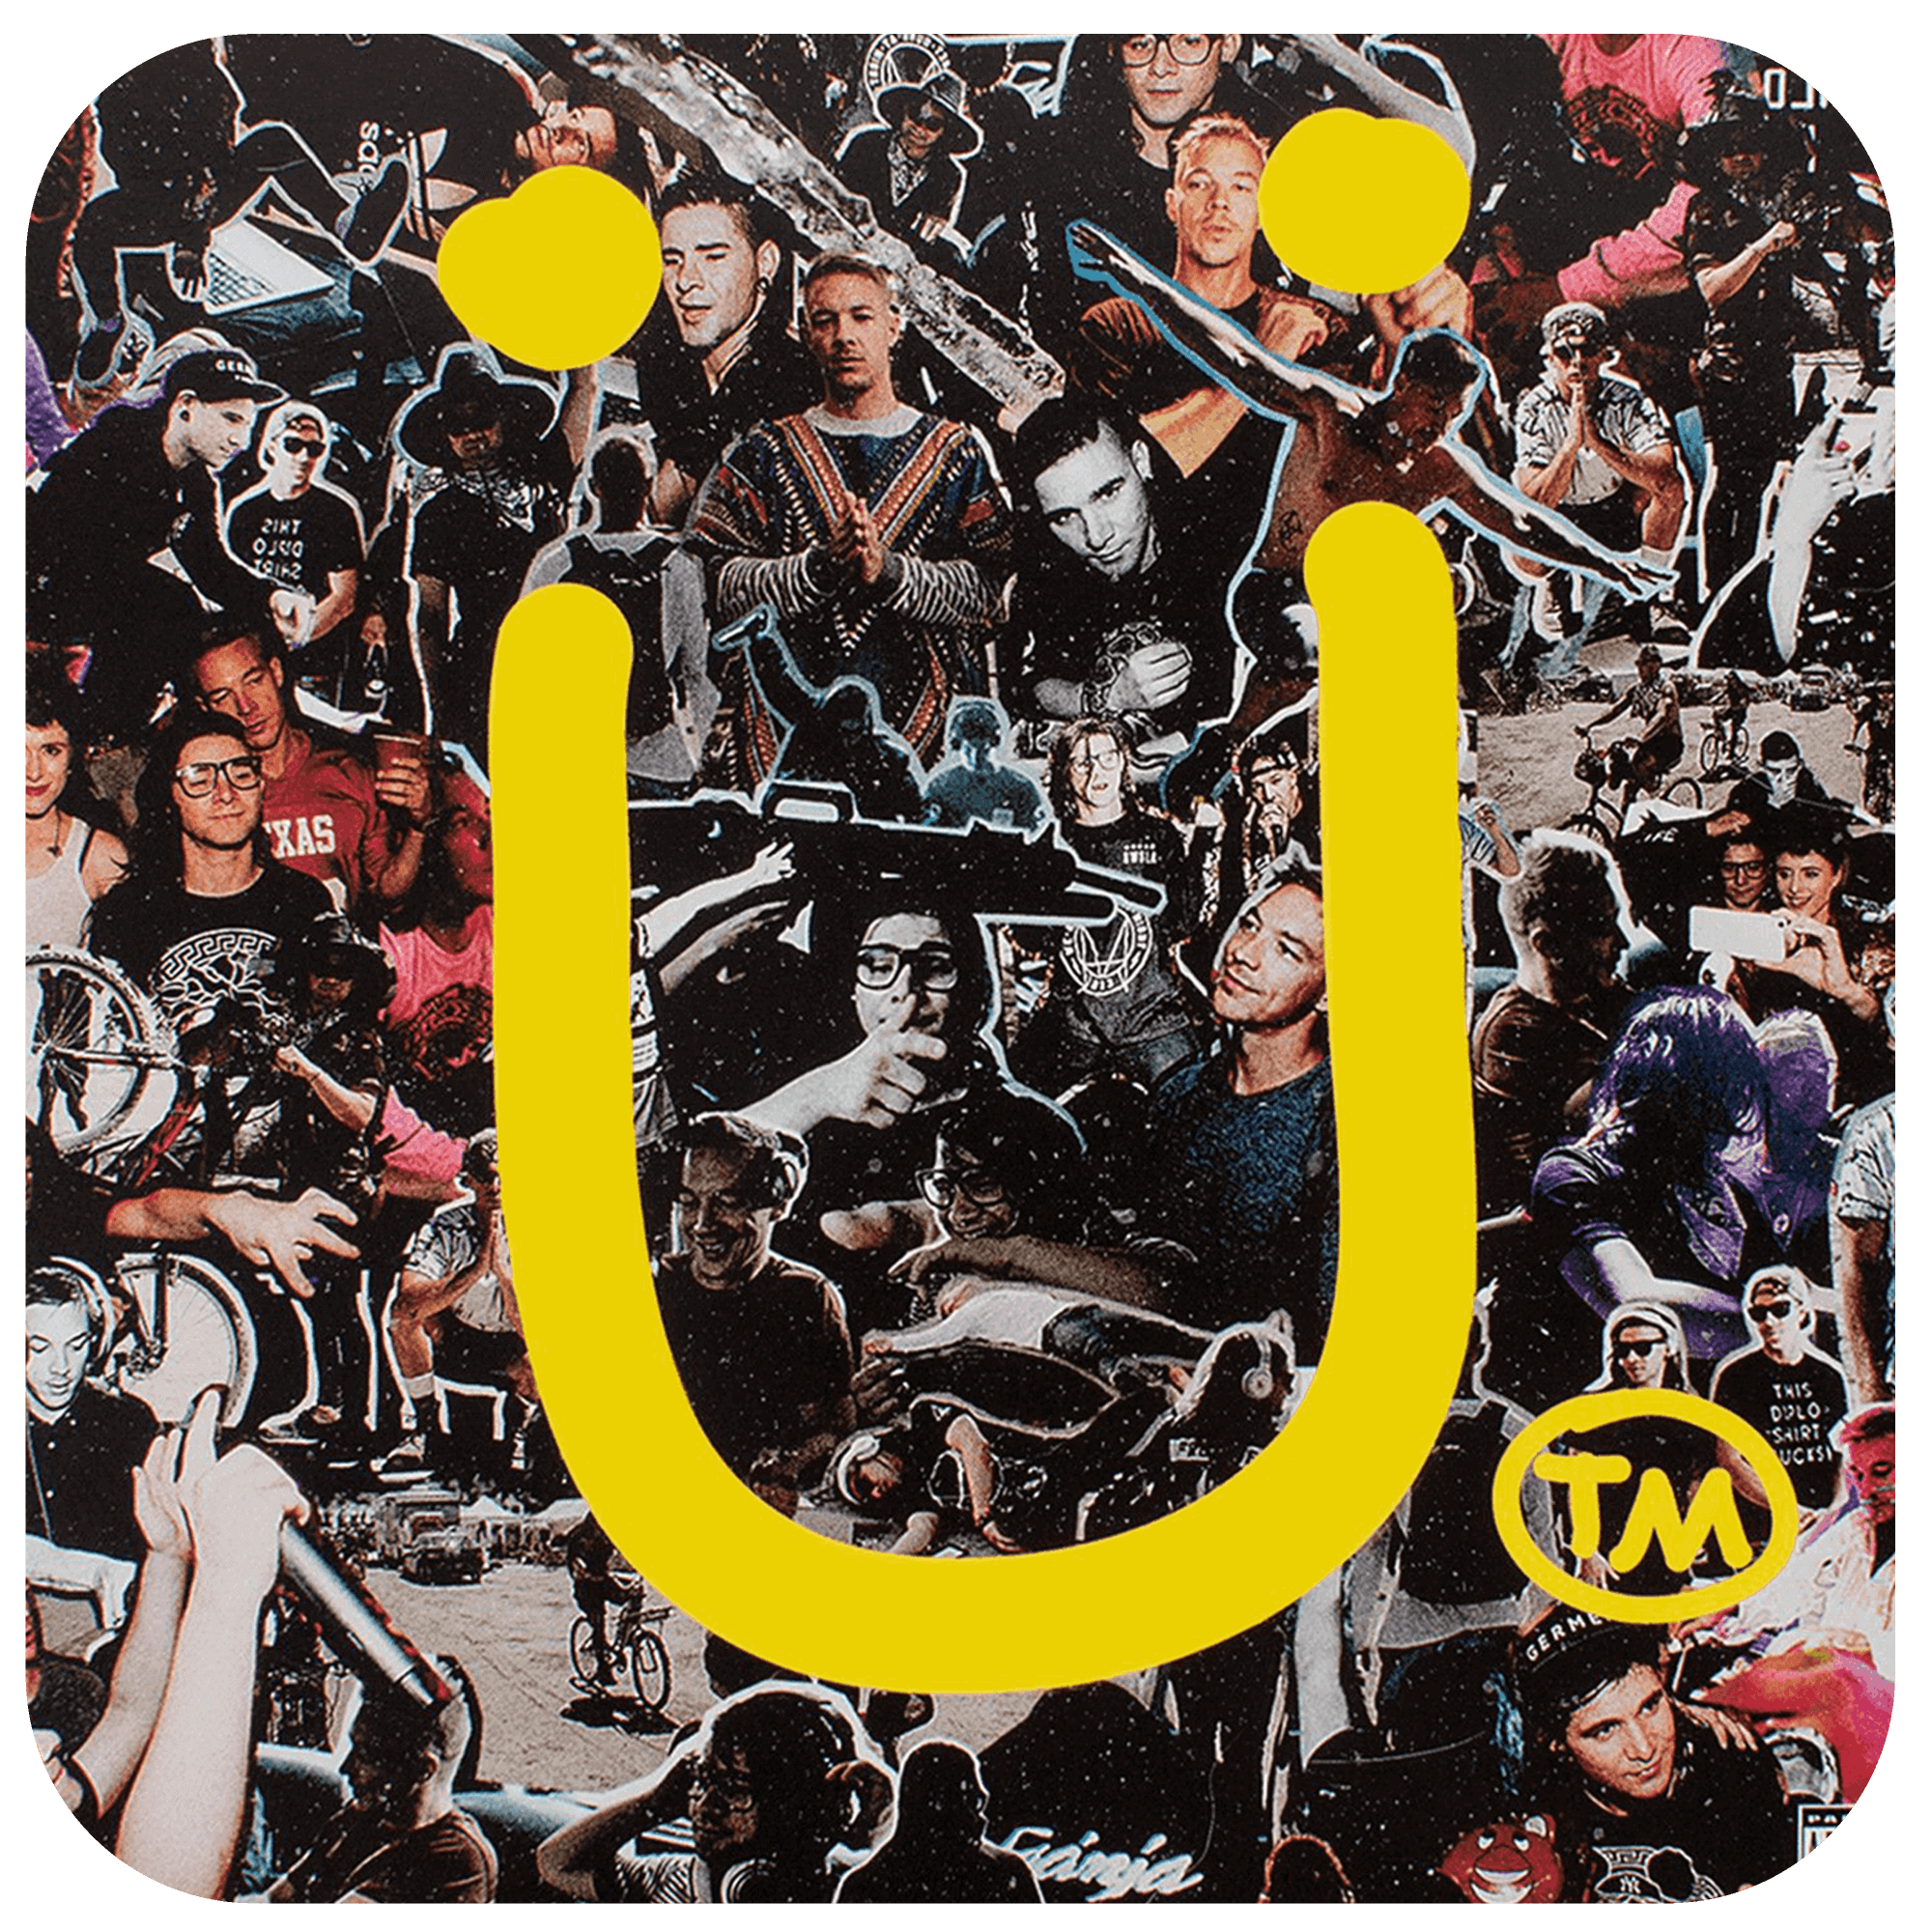 Where Are U Now': Bieber, Diplo and Skrillex Make a Hit